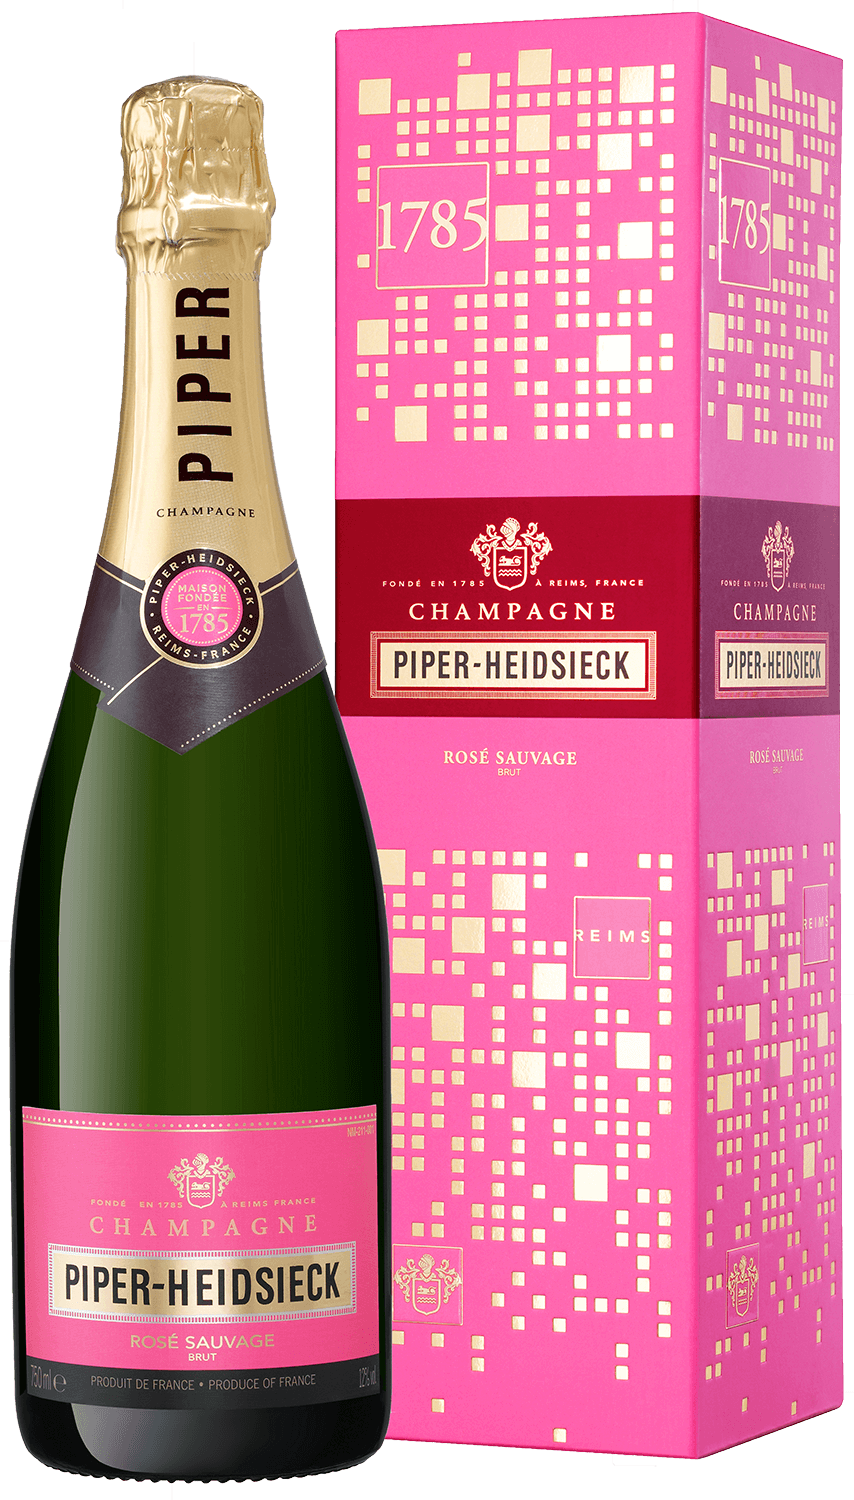 Piper-Heidsieck Sauvage Rose Brut Champagne AOC (gift box) ruinart rose brut champagne aoc gift box